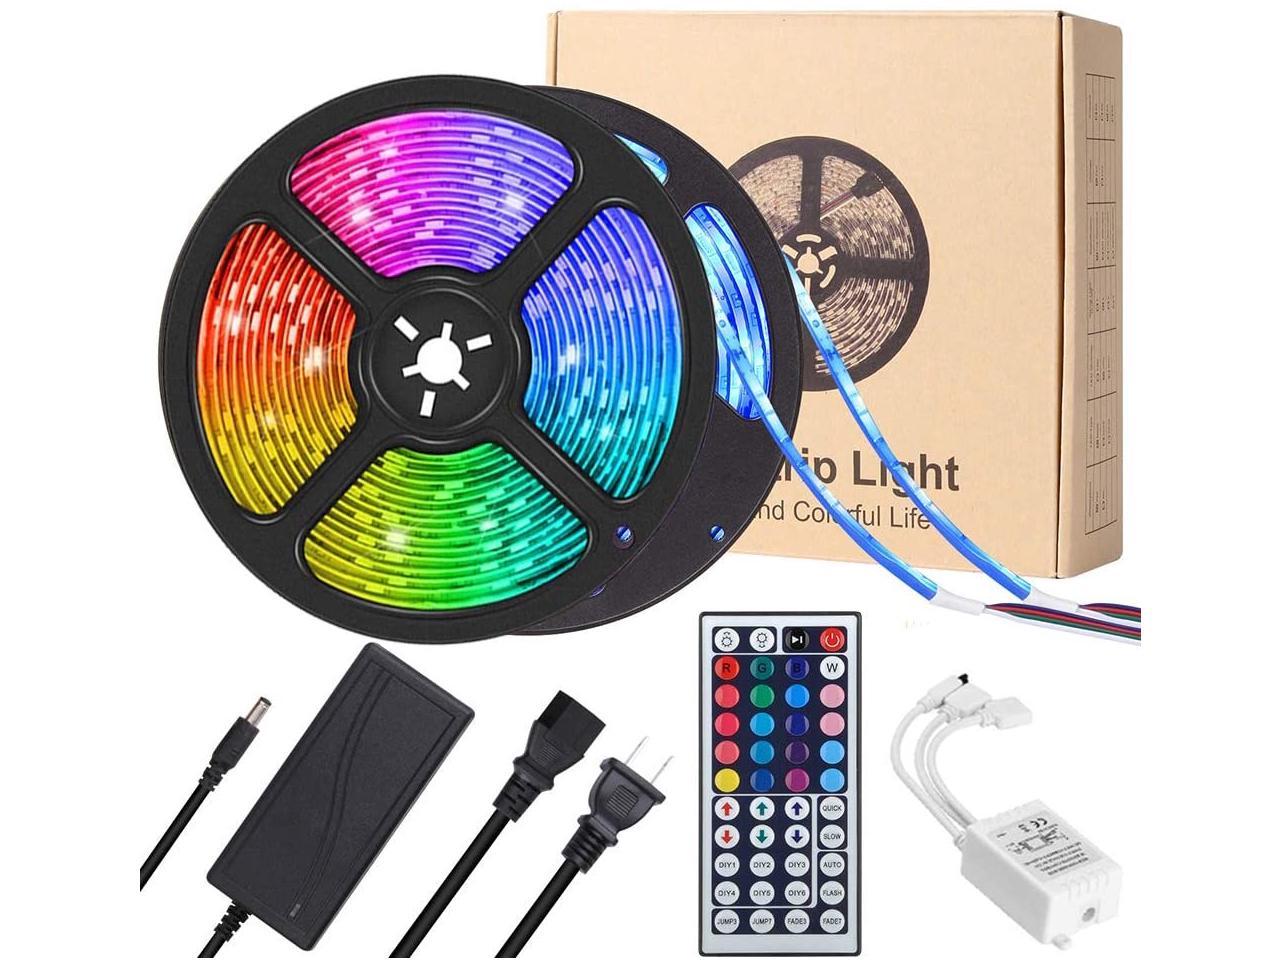 YORMICK Led Strip Lights 32.8 feet Waterproof Color Changing SMD RGB 300-LED Light Strips Kit with Keys IR Remote Control for BedroomRoomKitchenParty - Newegg.com